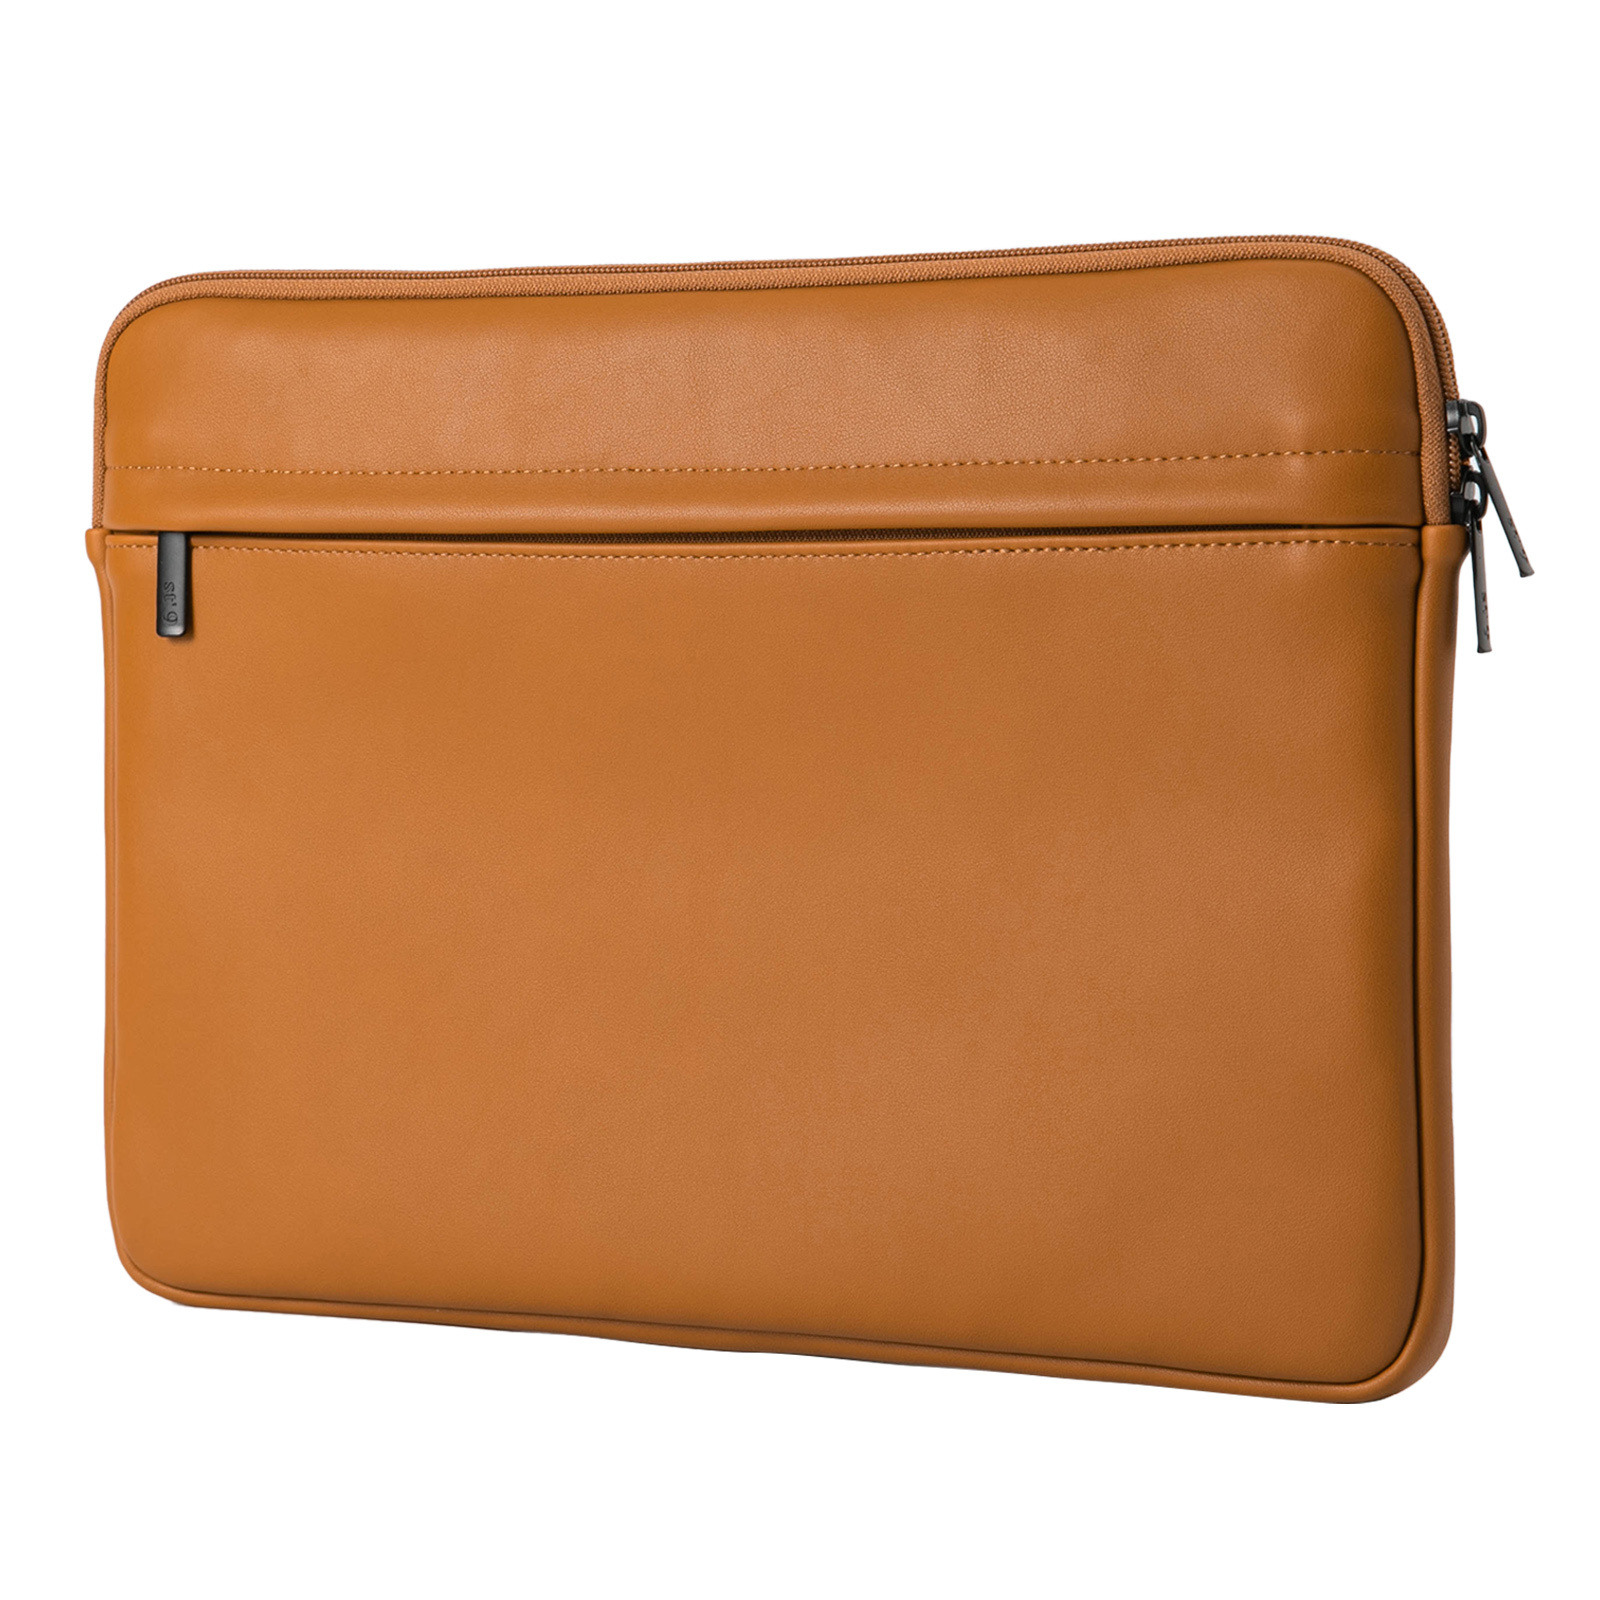 X-Large 15.6/16 inch Laptop Sleeve ERATO - BROWN 